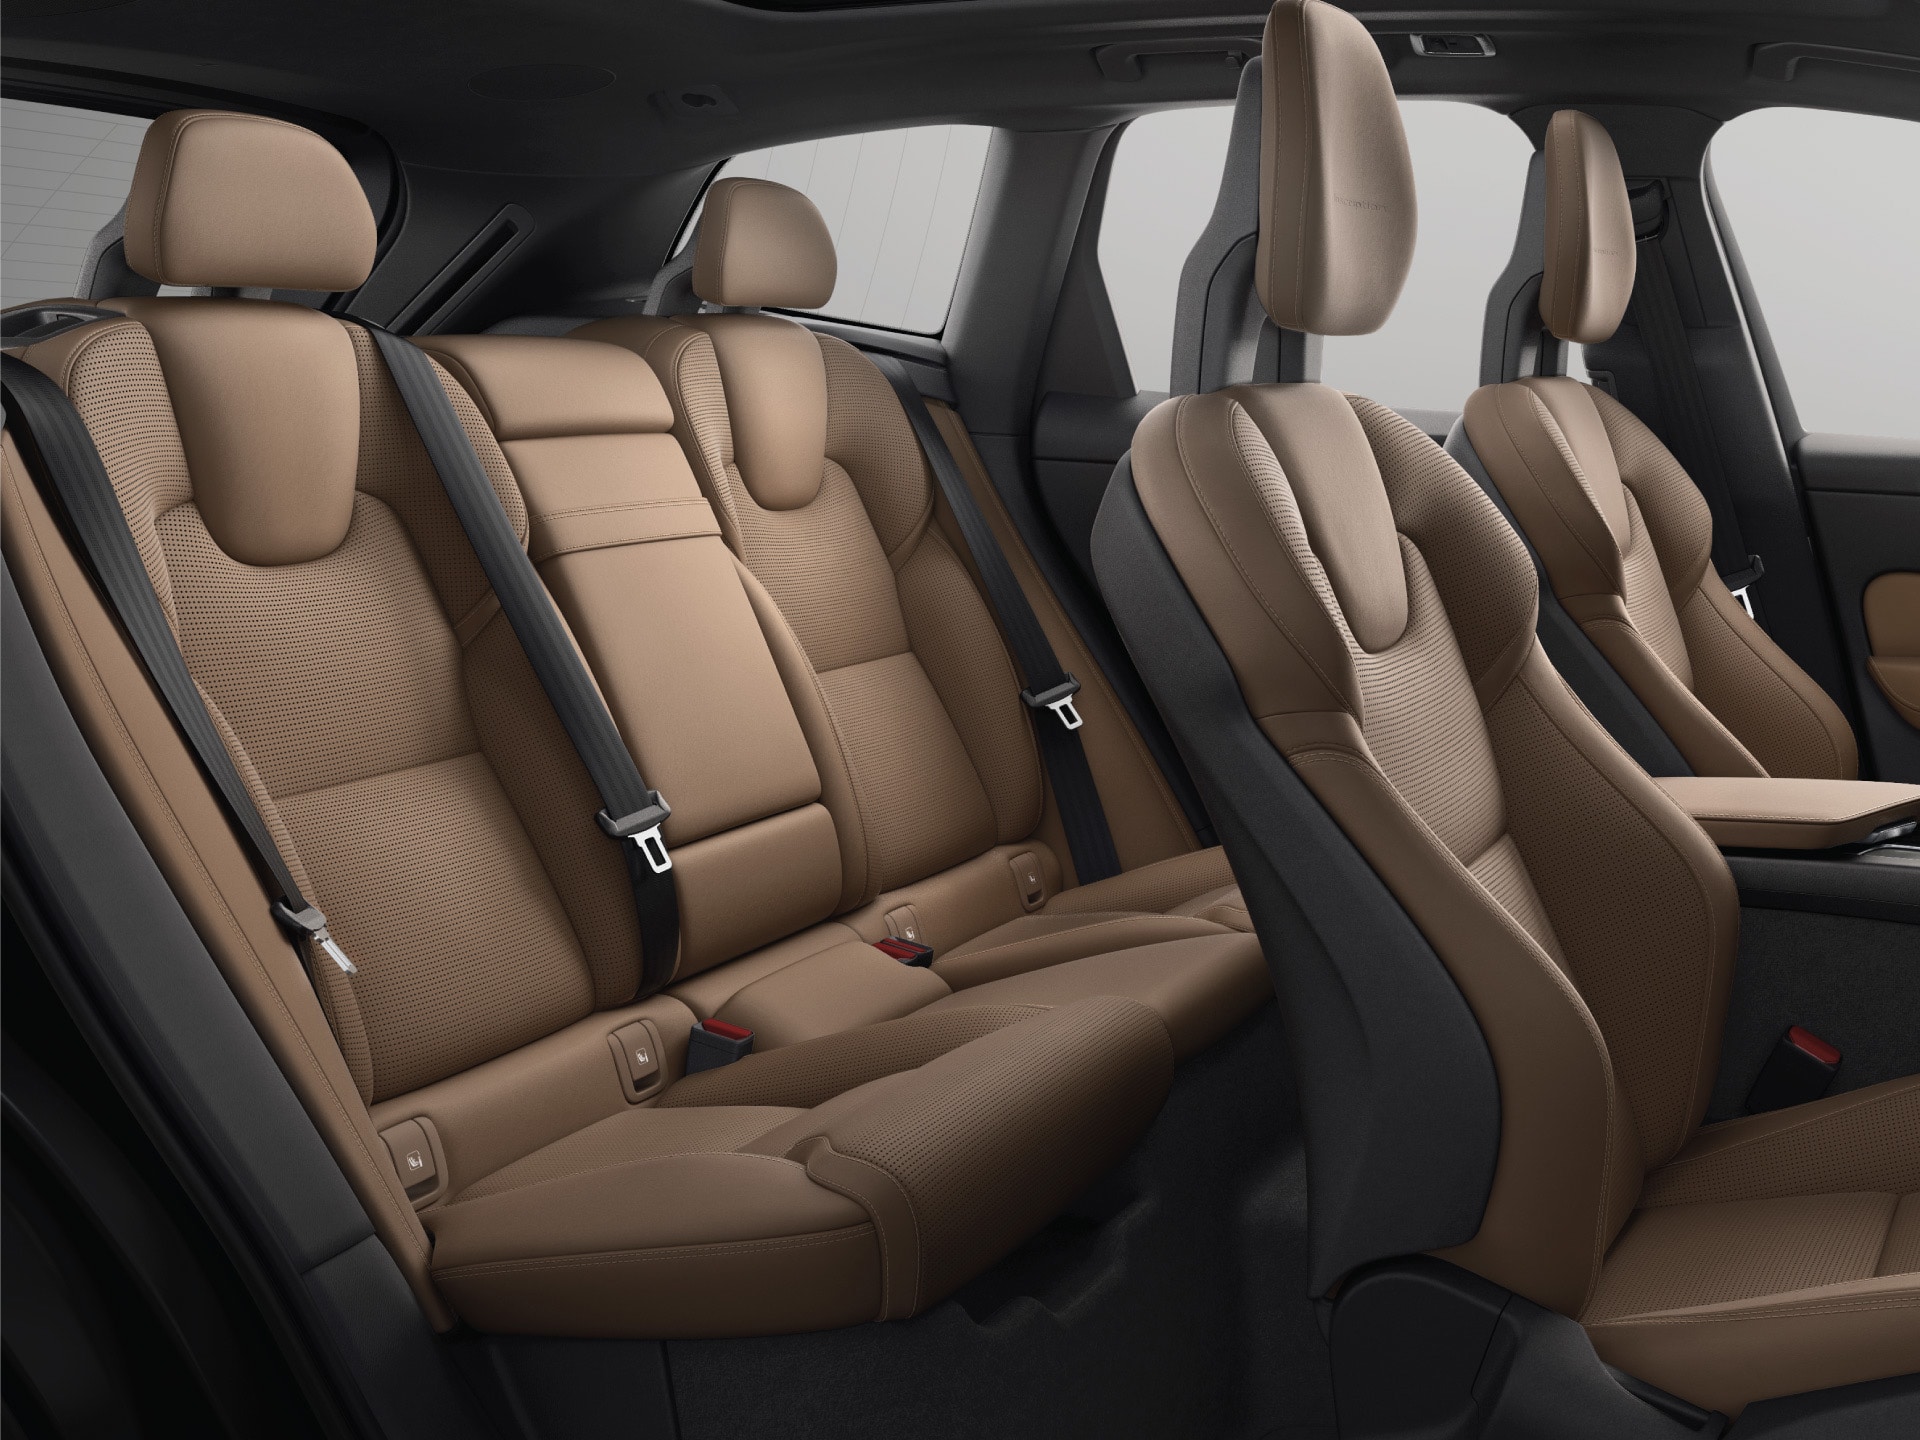 Nappa leather front seats in a Volvo XC60 SUV.